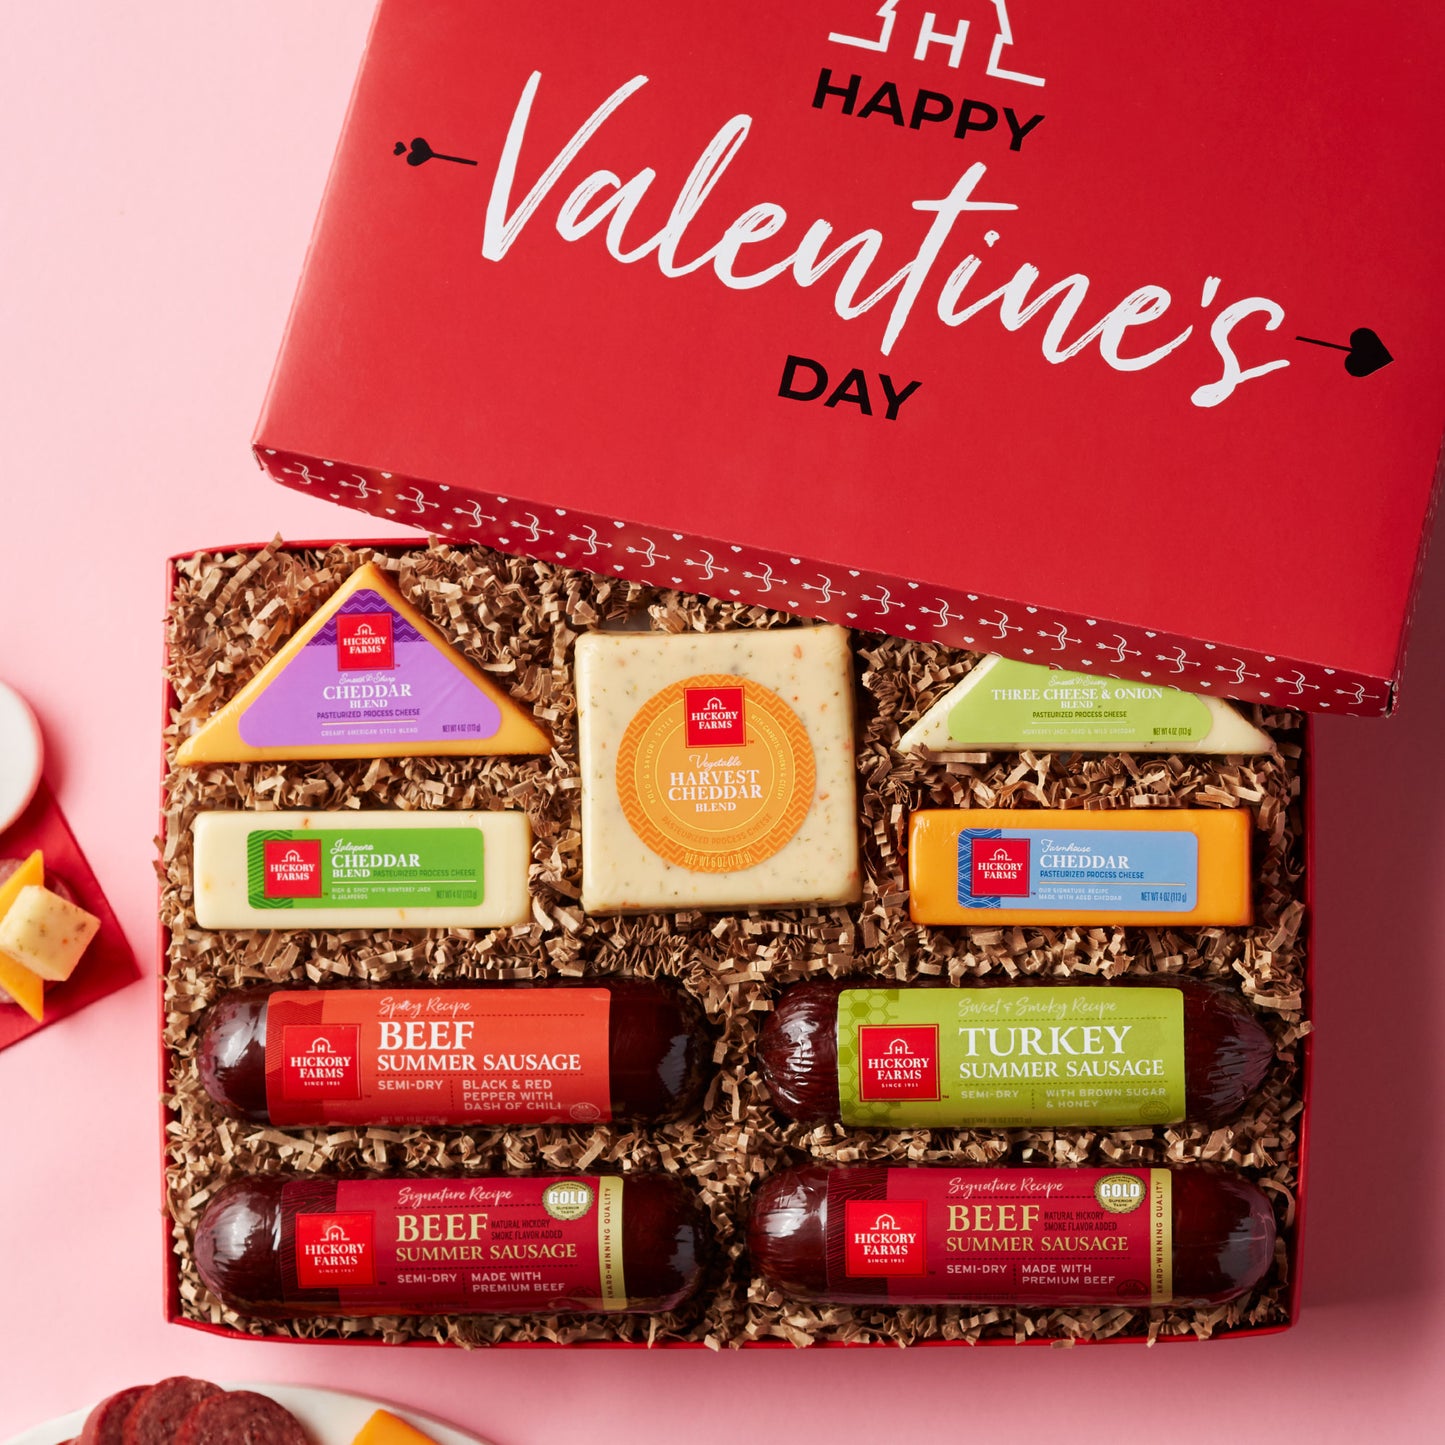 Some Like It Hot: Valentine's Day Cheese & Meat Gift Box